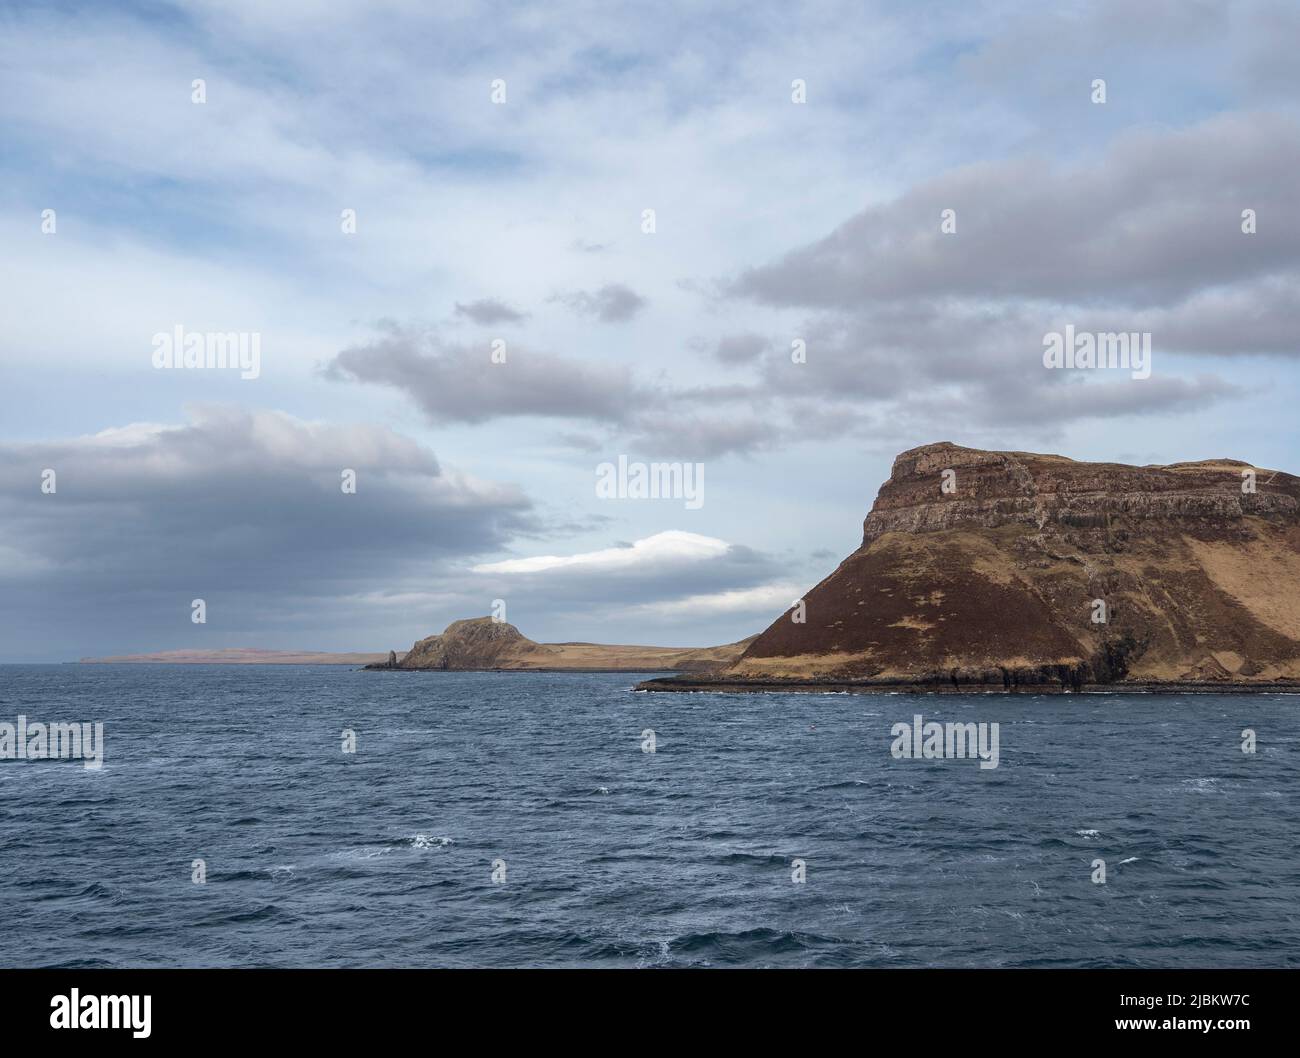 Ru Idrigill and Stack of Skudiburgh as seen from the Calmac ferry as it departs from Uig on the Isle of Skye, Scotland Stock Photo